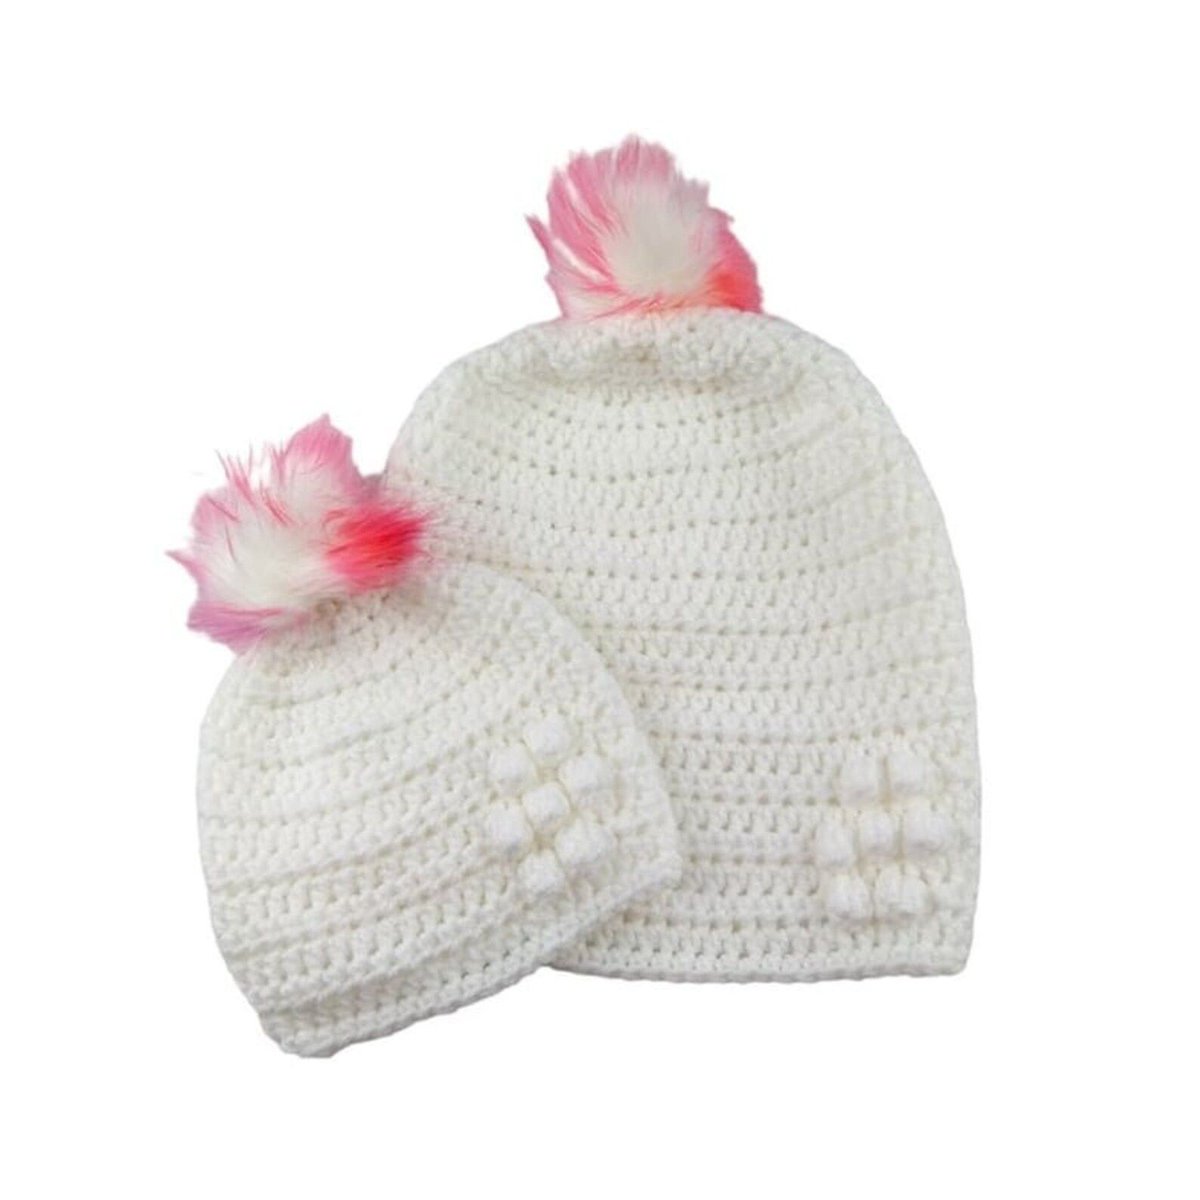 Stay warm in style with these unique, hand-crocheted matching hats for mums and babies! Detailed with flowers and detachable faux fur pompoms. Perfect for that special mummy-baby bond! knittingtopia.etsy.com/listing/168535… #knittingtopia #etsy #handmade #tweetuk #etsyRT #craftbizparty #MHHSBD